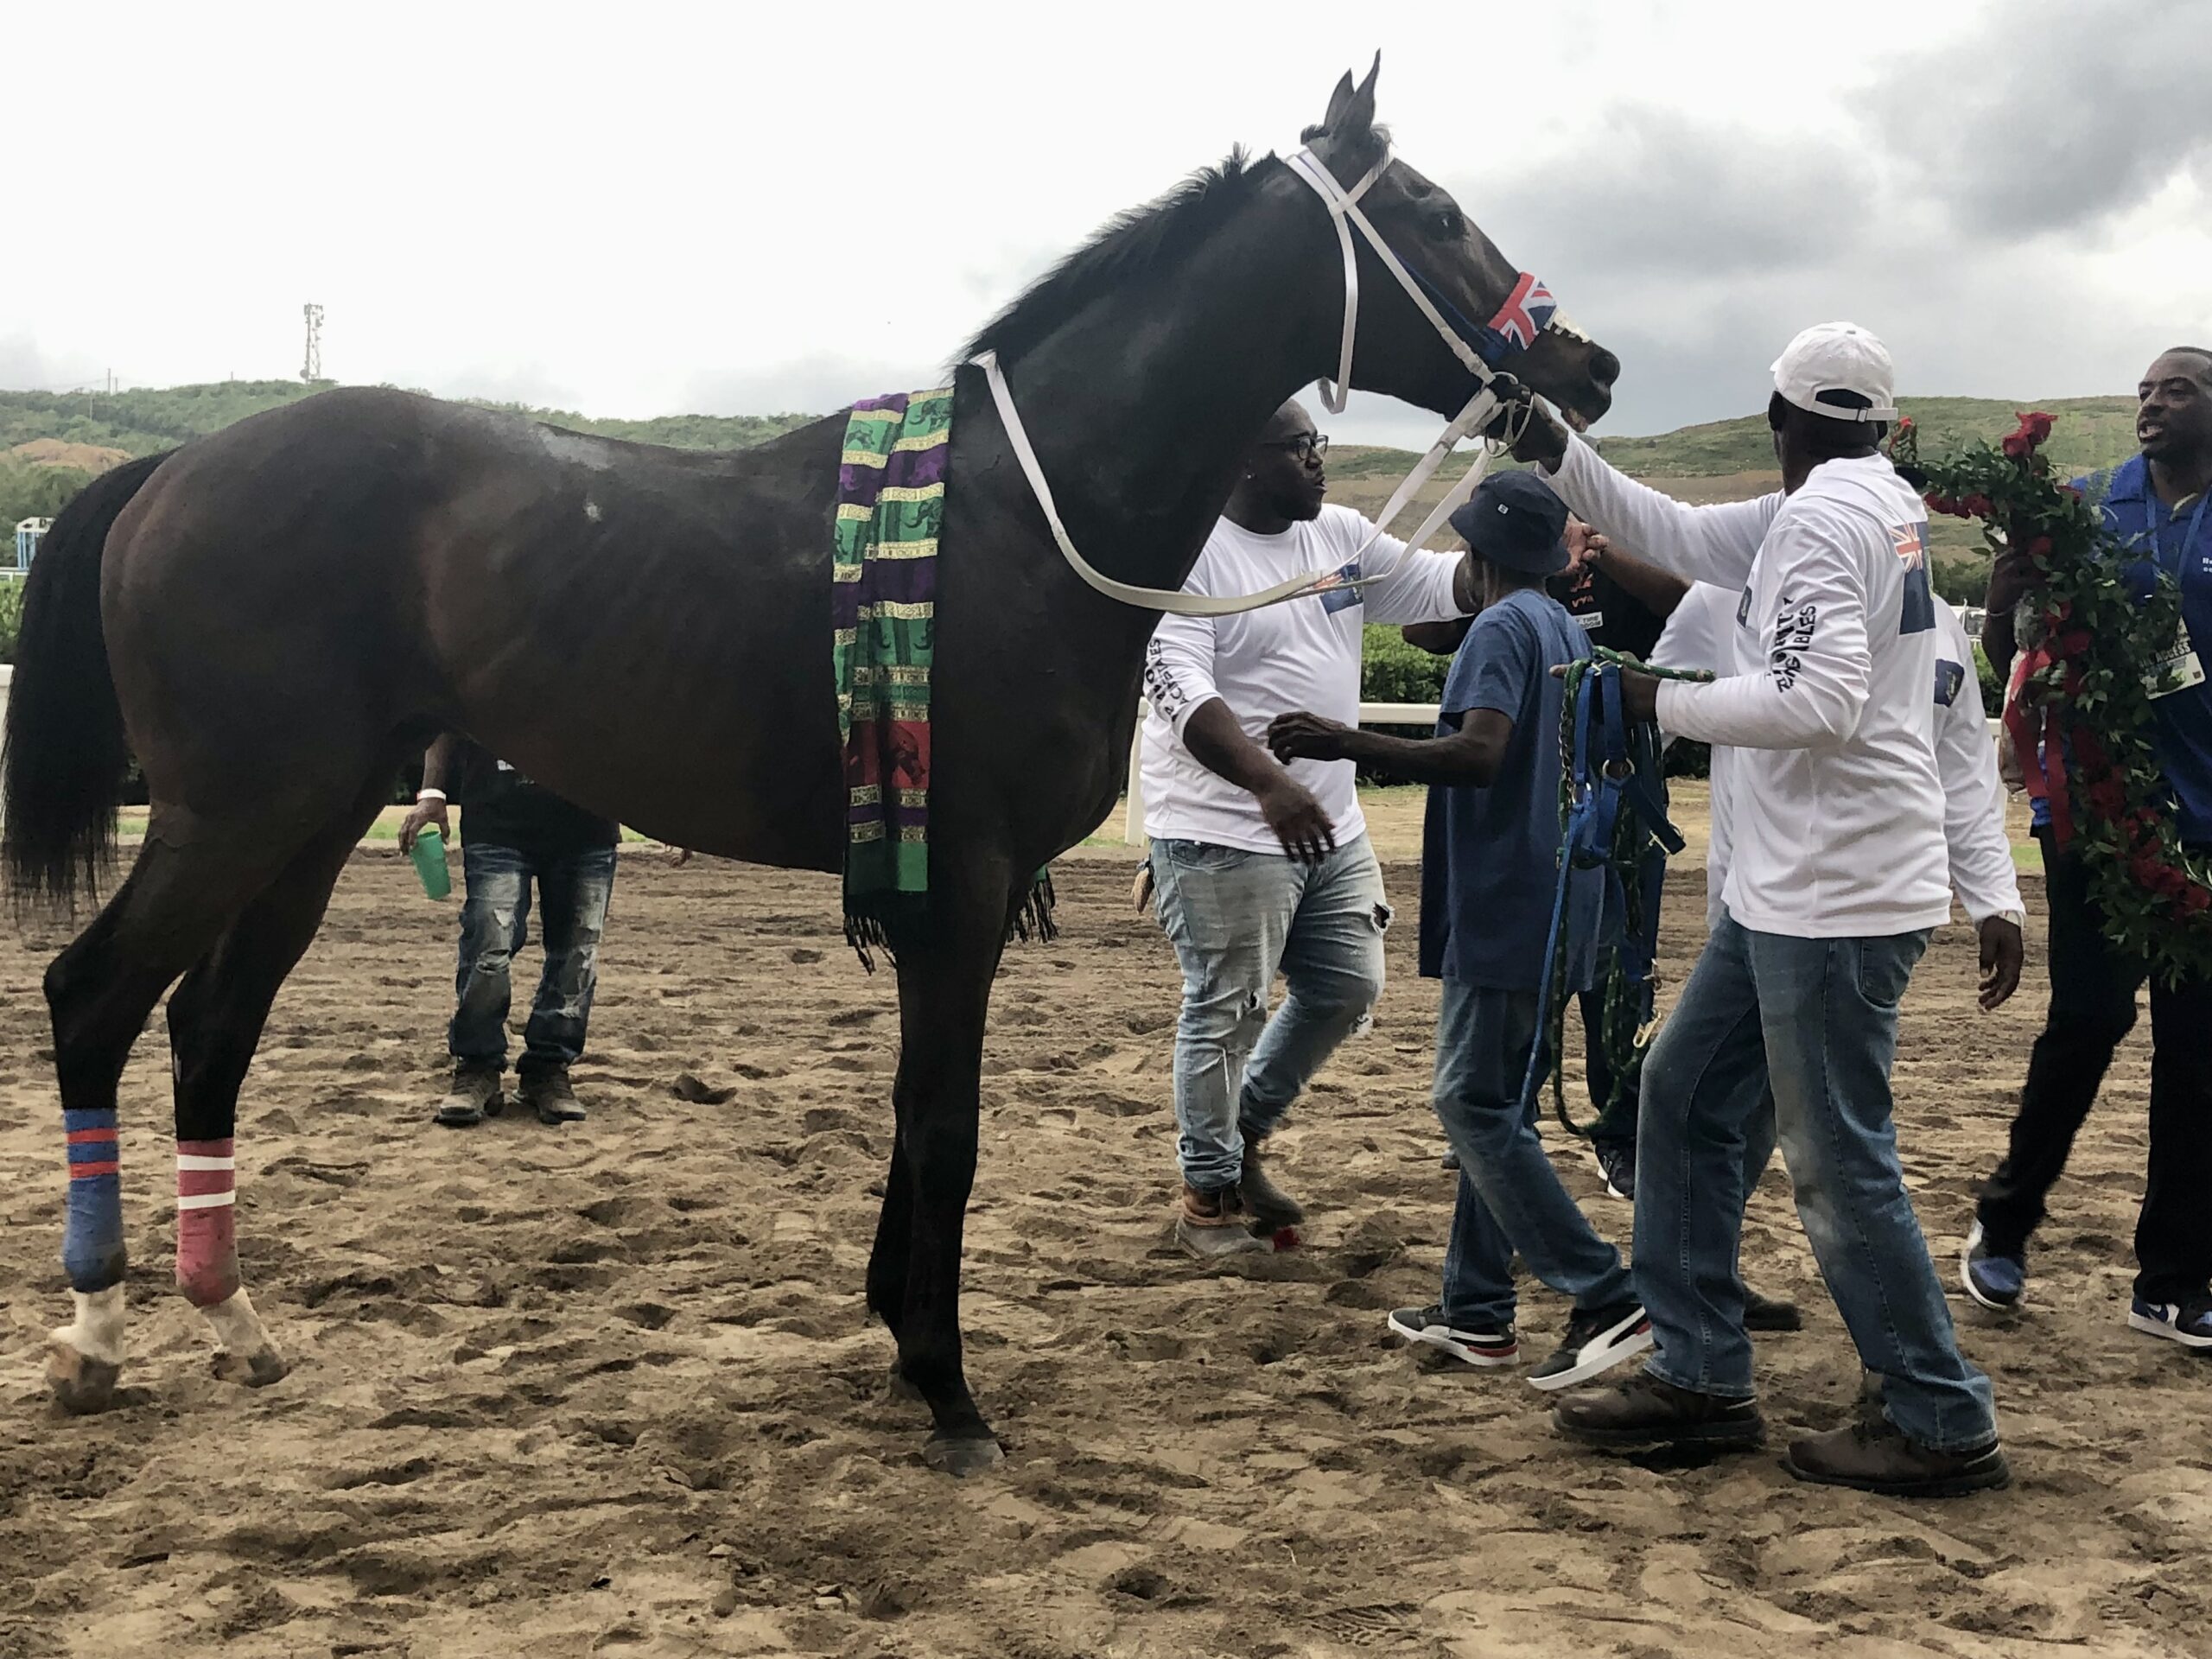 GhostInYou from the British Virgin Islands, making his debut appearance at the 2024 Carnival races, won the Governor's Cup on Friday. (Source photo by Judi Shimel)